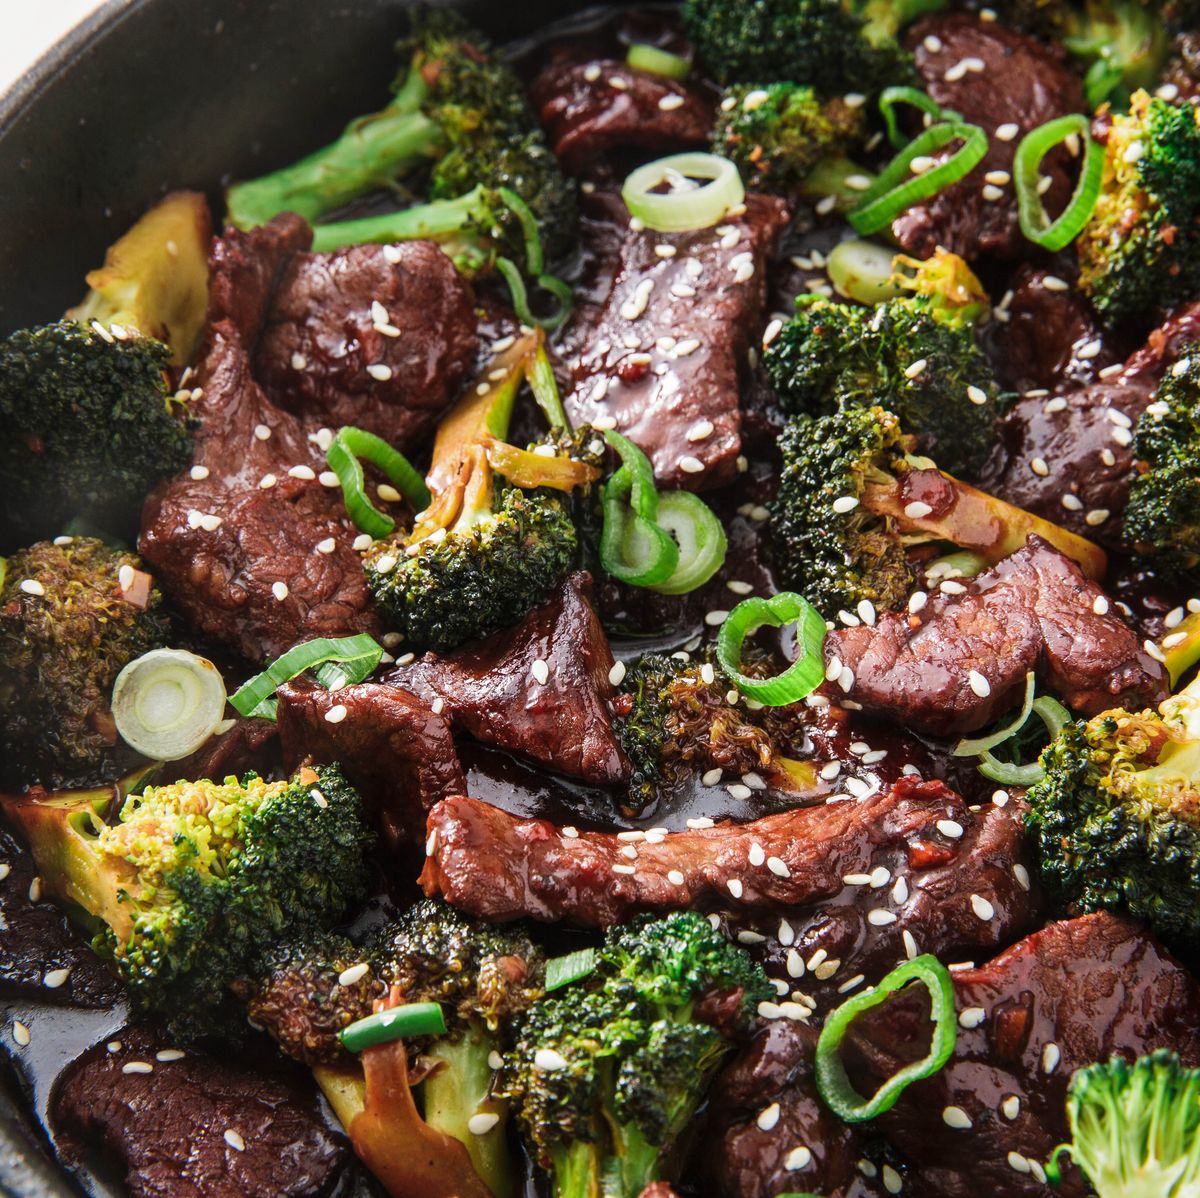 beef with broccoli recipe